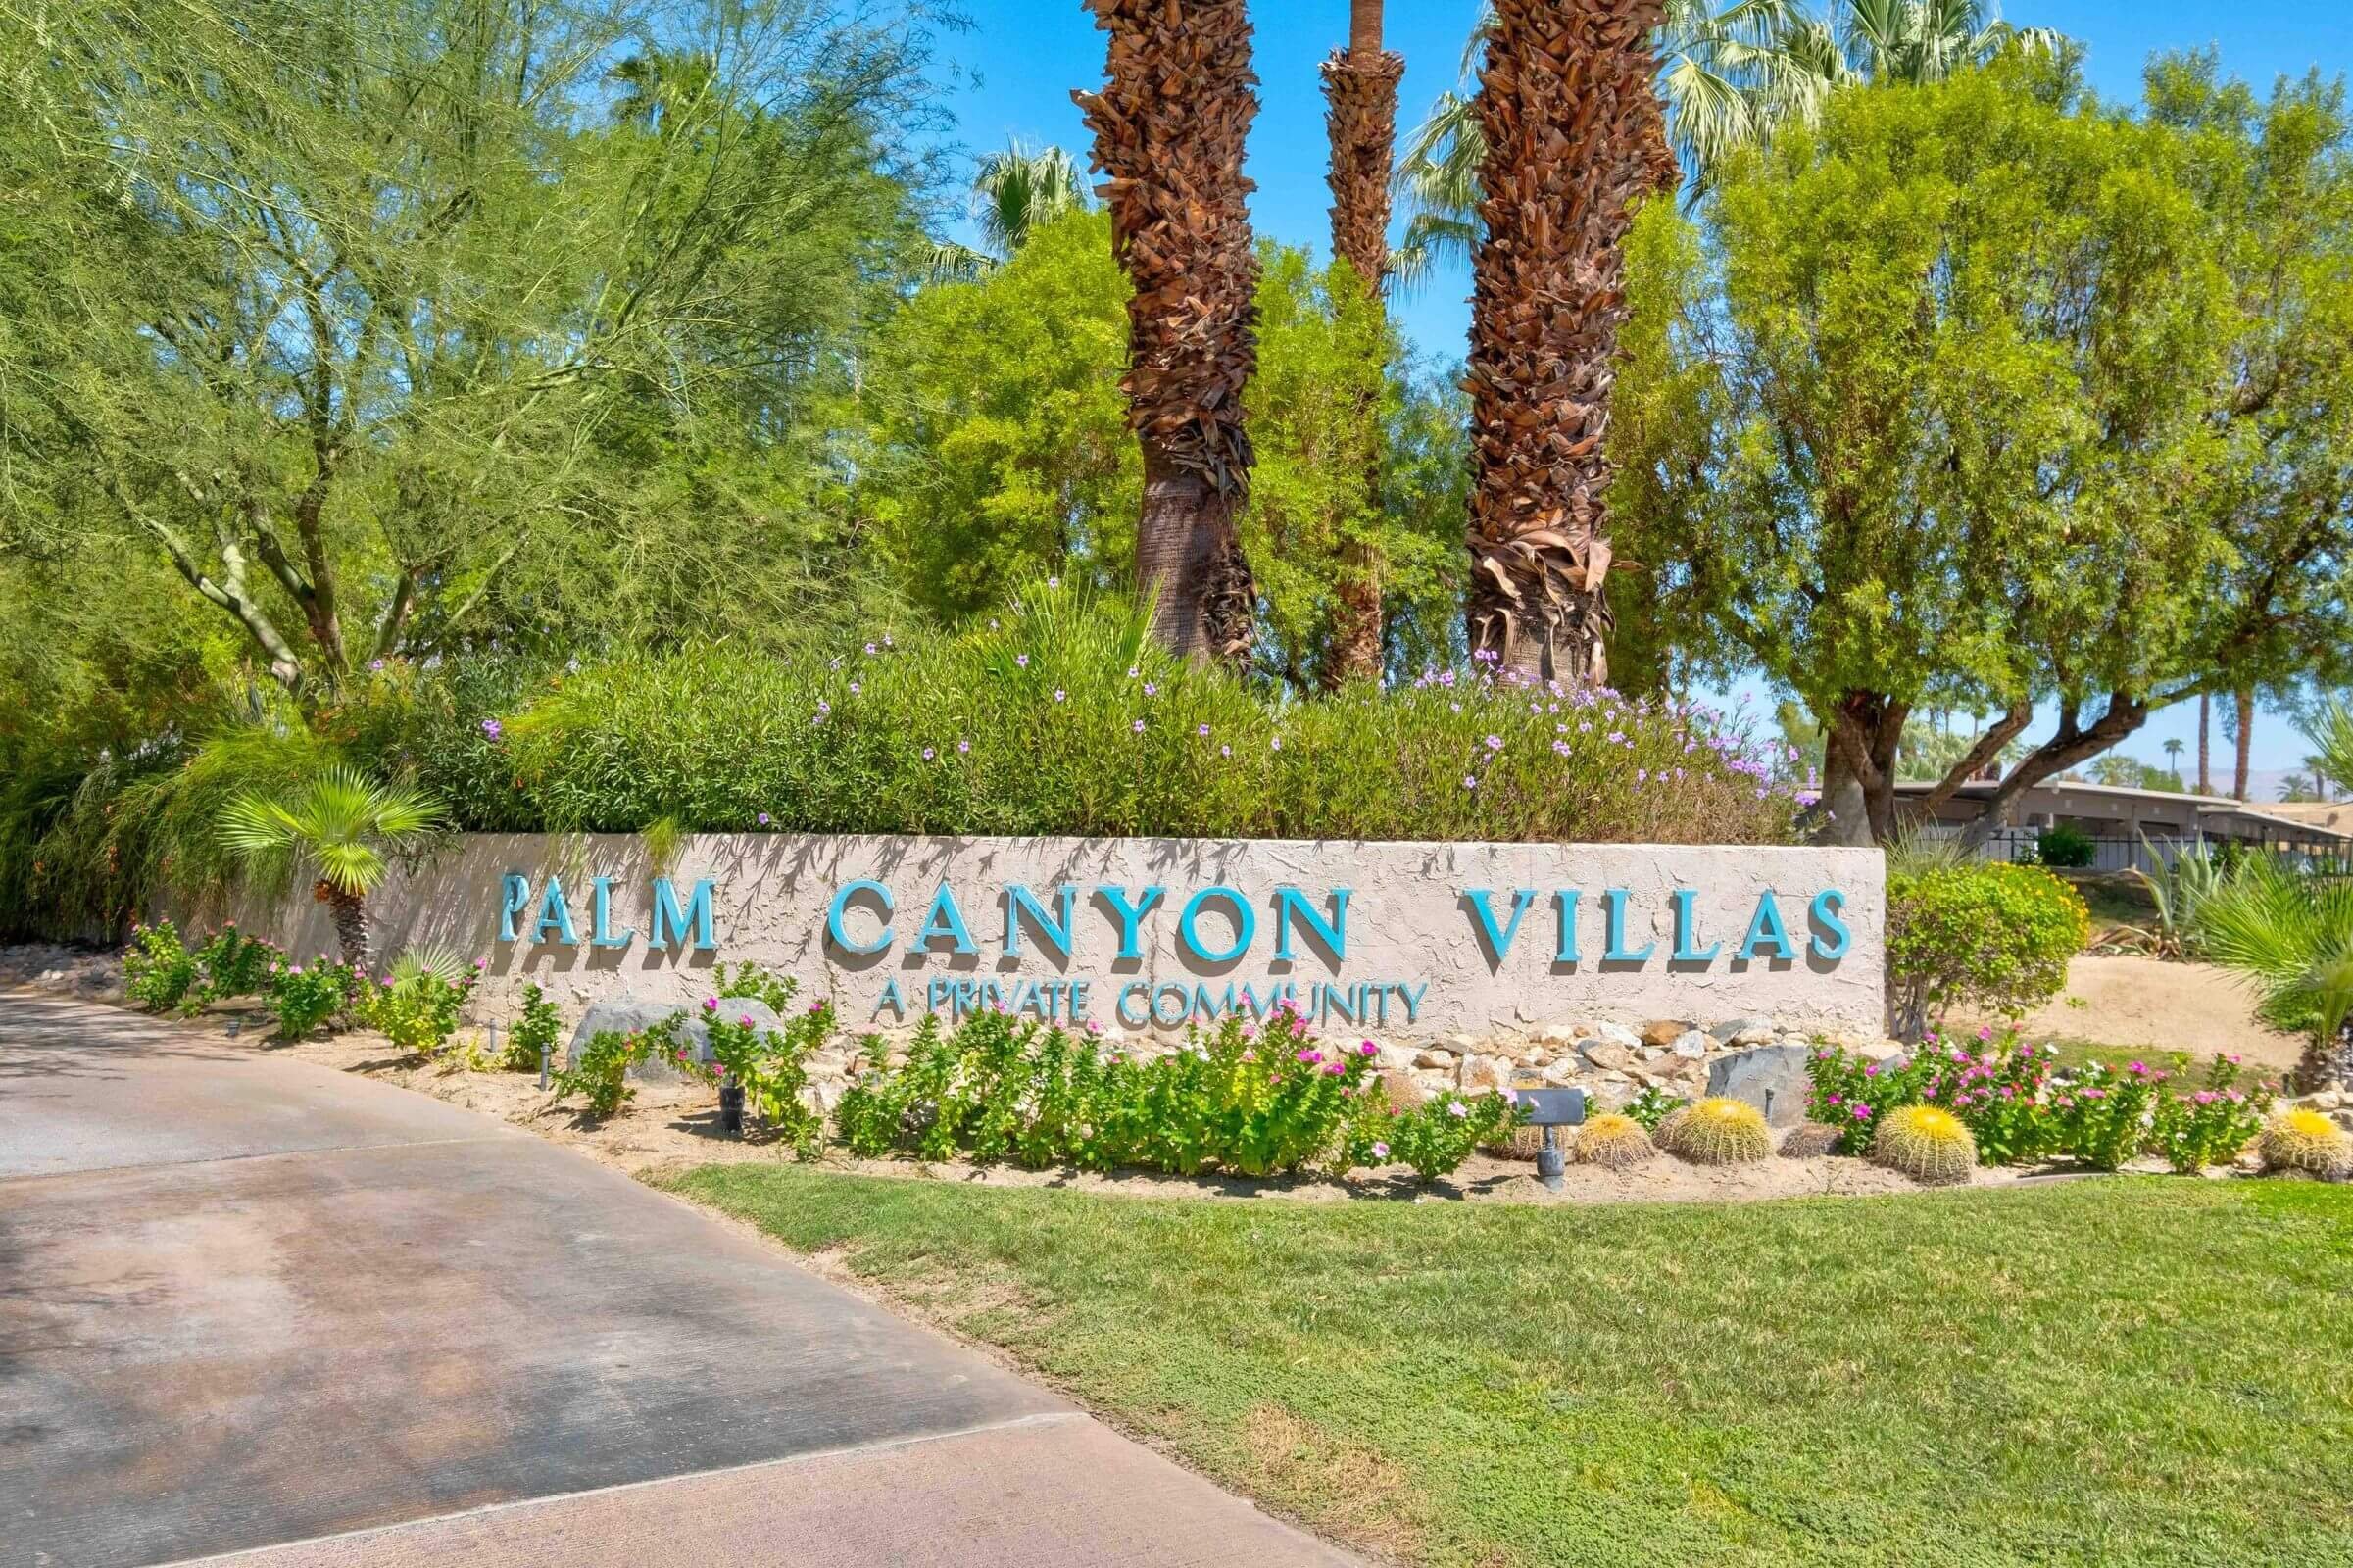 Palm Canyon Villas Homes For Sale